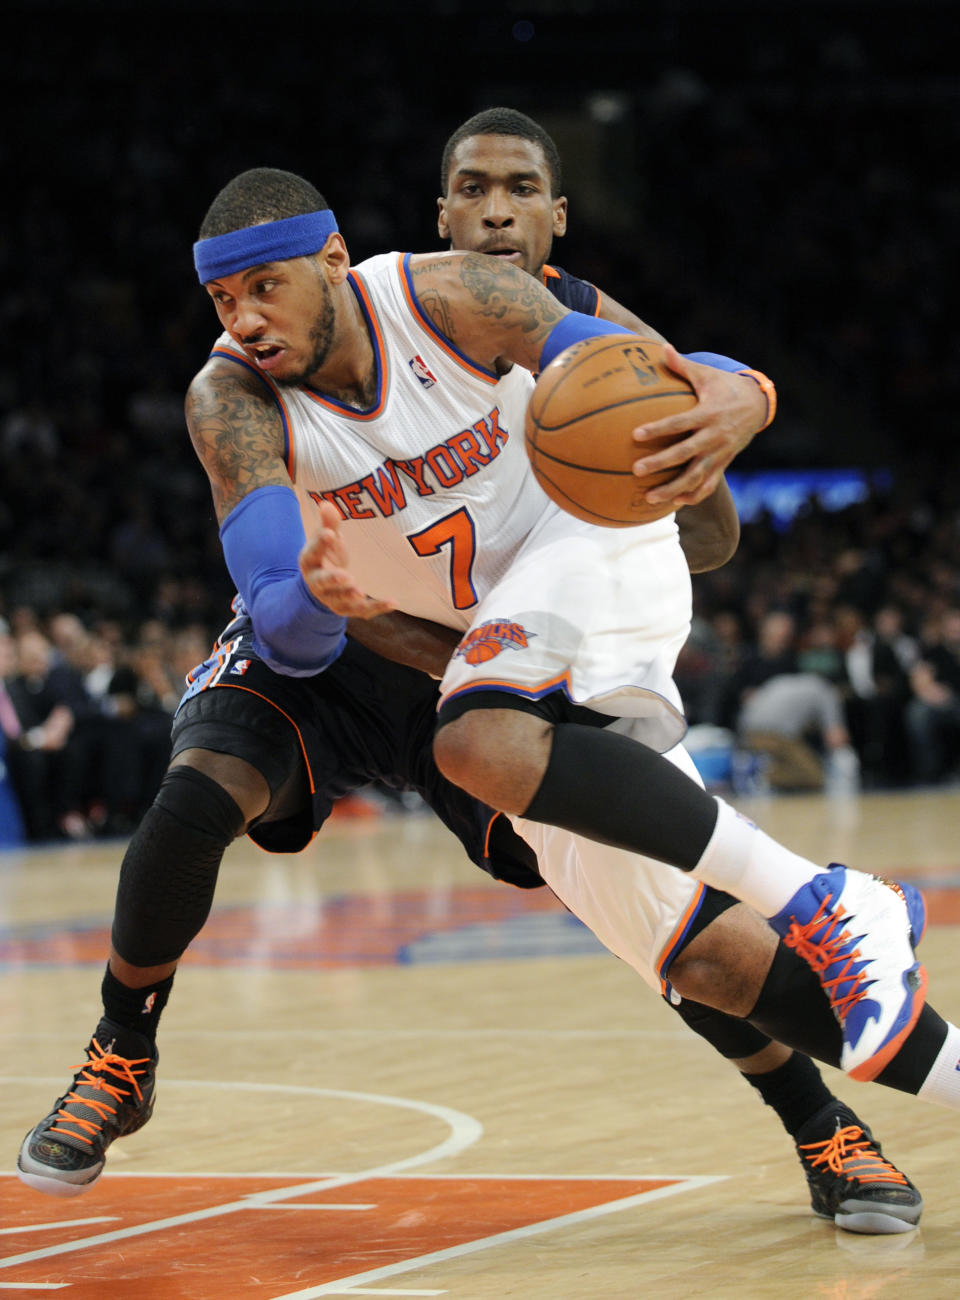 New York Knicks' Carmelo Anthony (7) drives by Charlotte Bobcats' Michael Kidd-Gilchrist during the second quarter of an NBA basketball game, Friday, Jan. 24, 2014, at Madison Square Garden in New York. Anthony scored 62 points as the Knicks defeated the Bobcats 125-96. (AP Photo/Bill Kostroun)